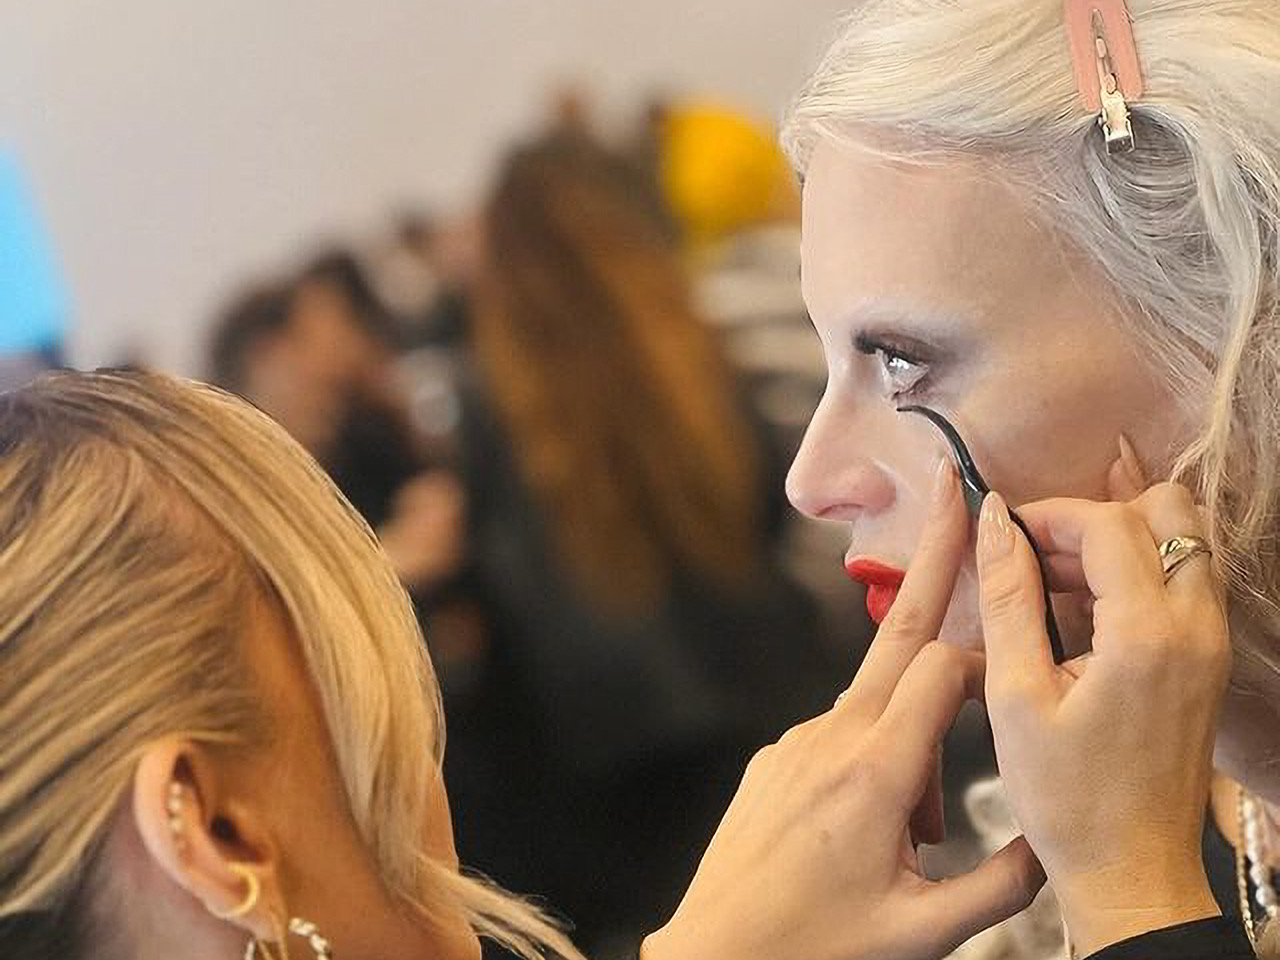 Make-up artist applies lower false lashes to a model backstage at a fashion show.